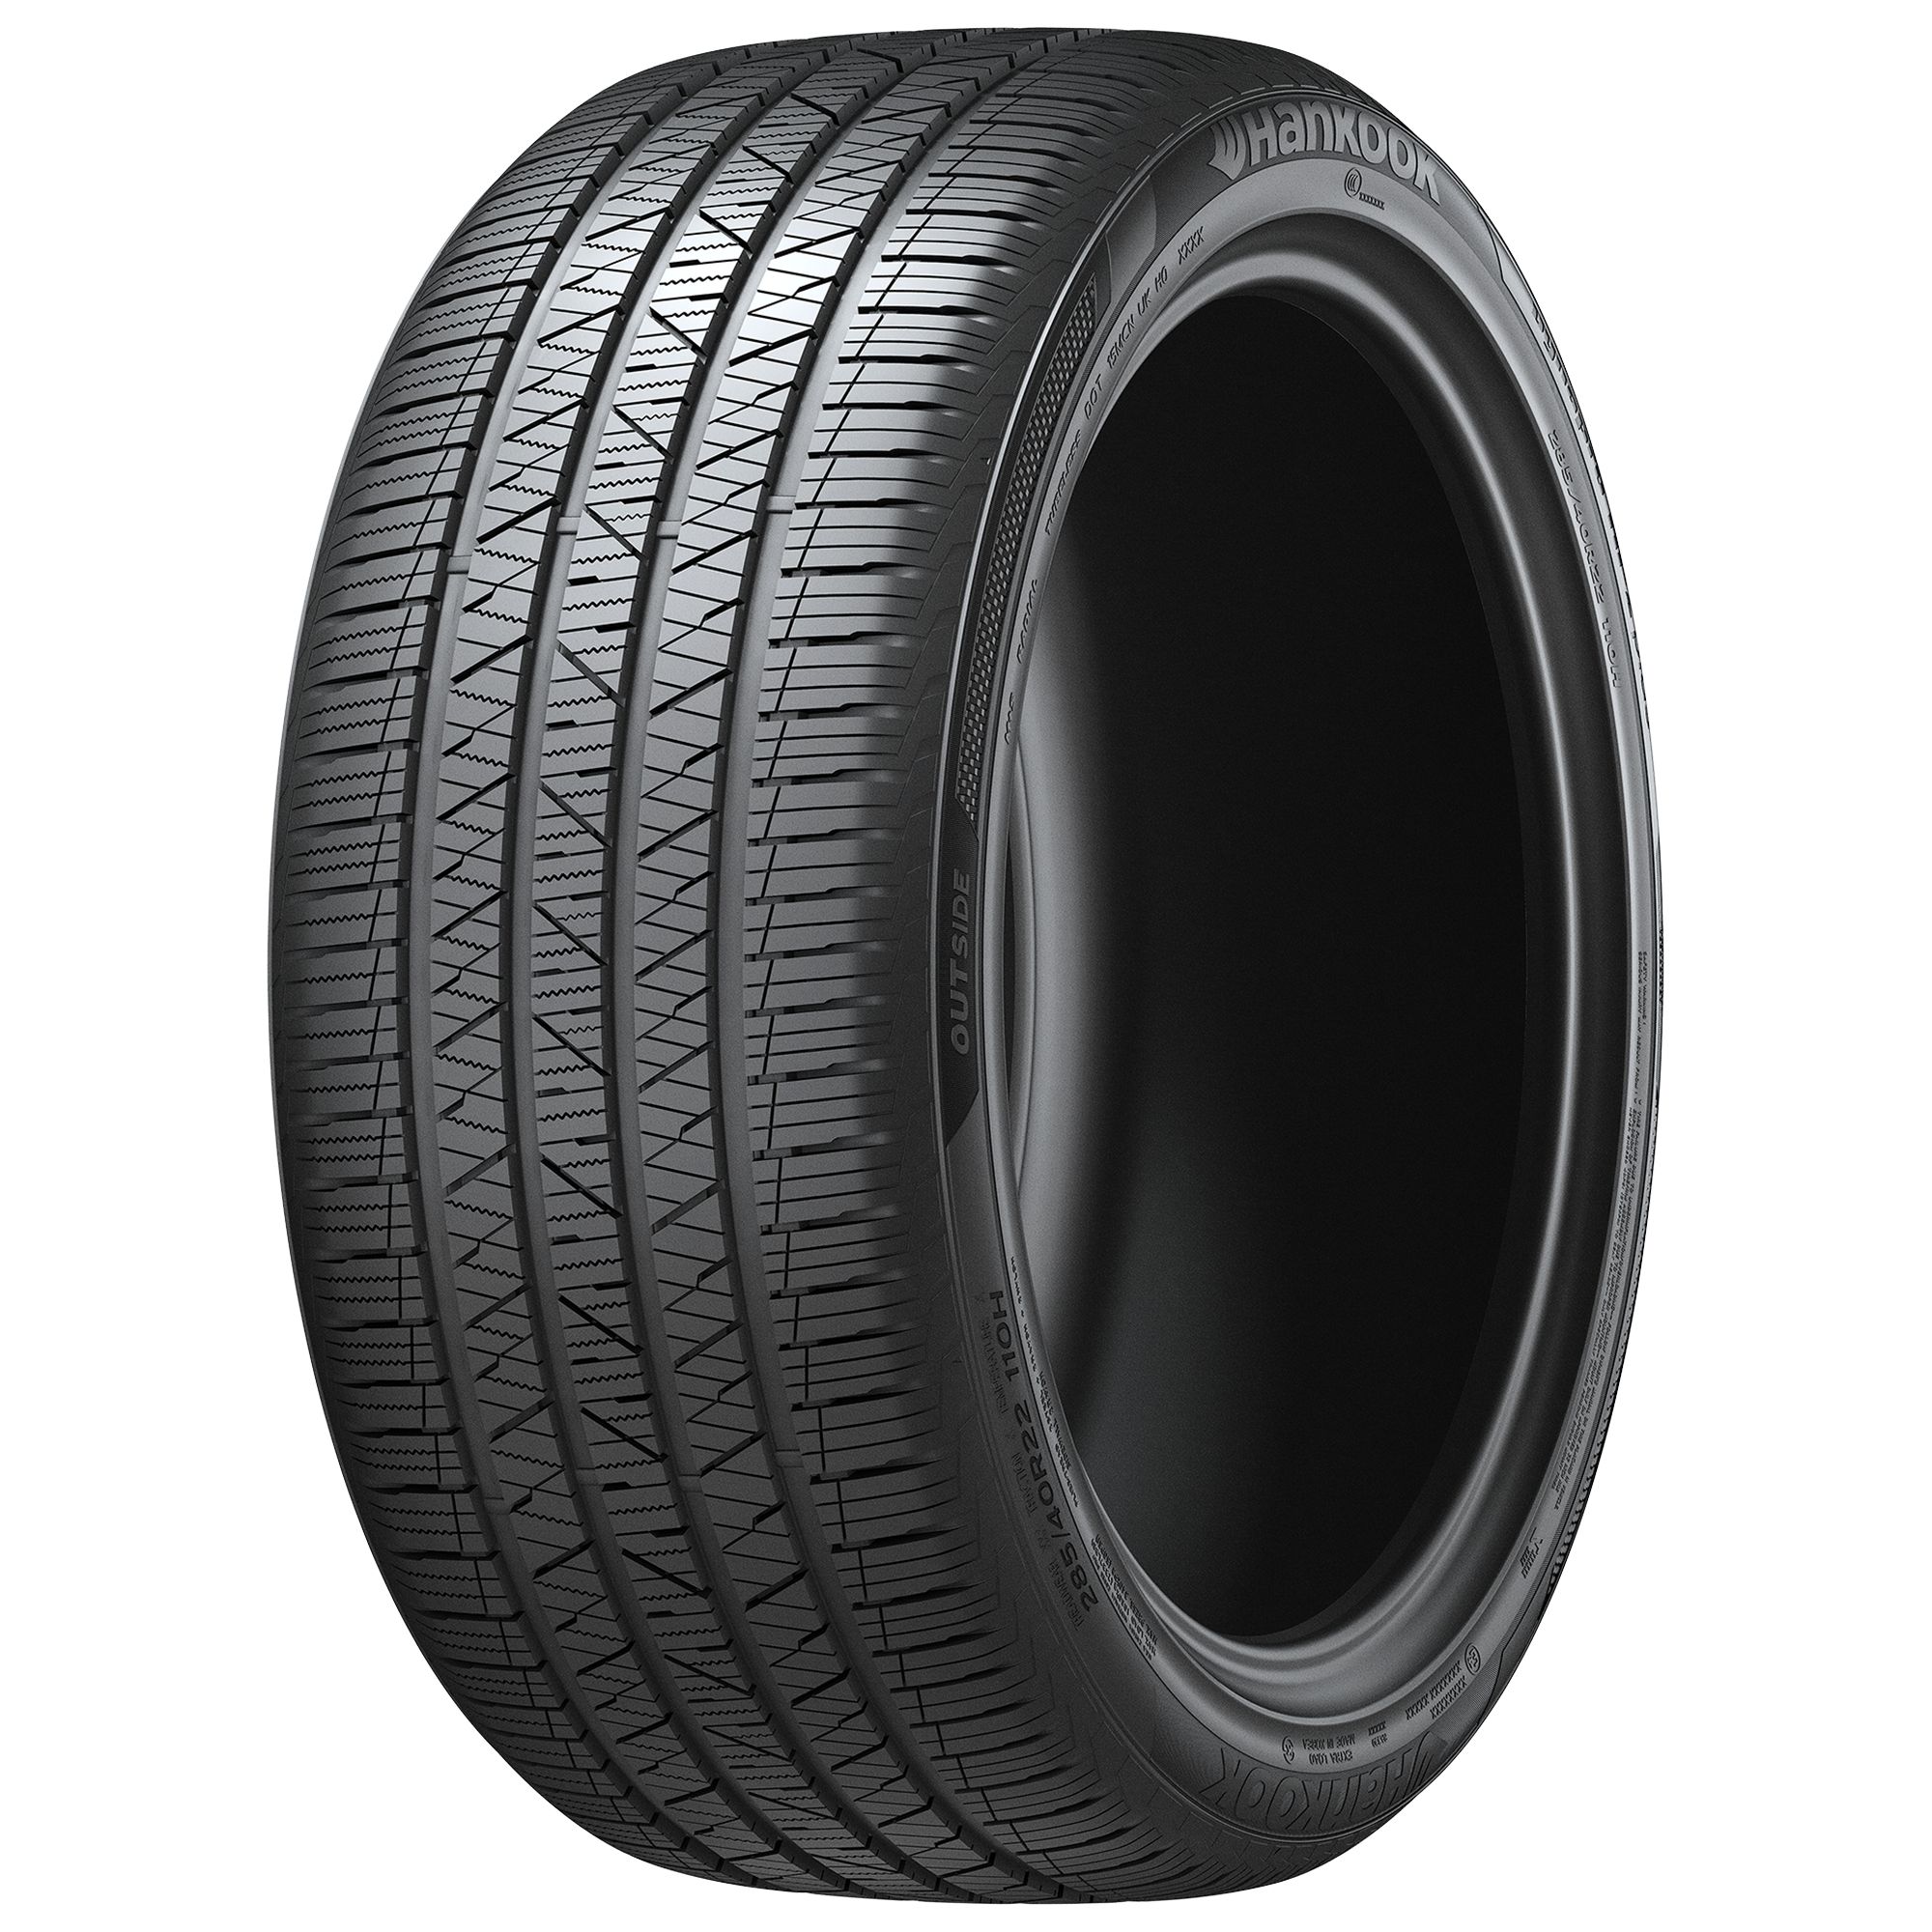 HANKOOK DYNAPRO HP2 PLUS (RA33D) (AO) 285/40R22 110H SOUND ABSORBER